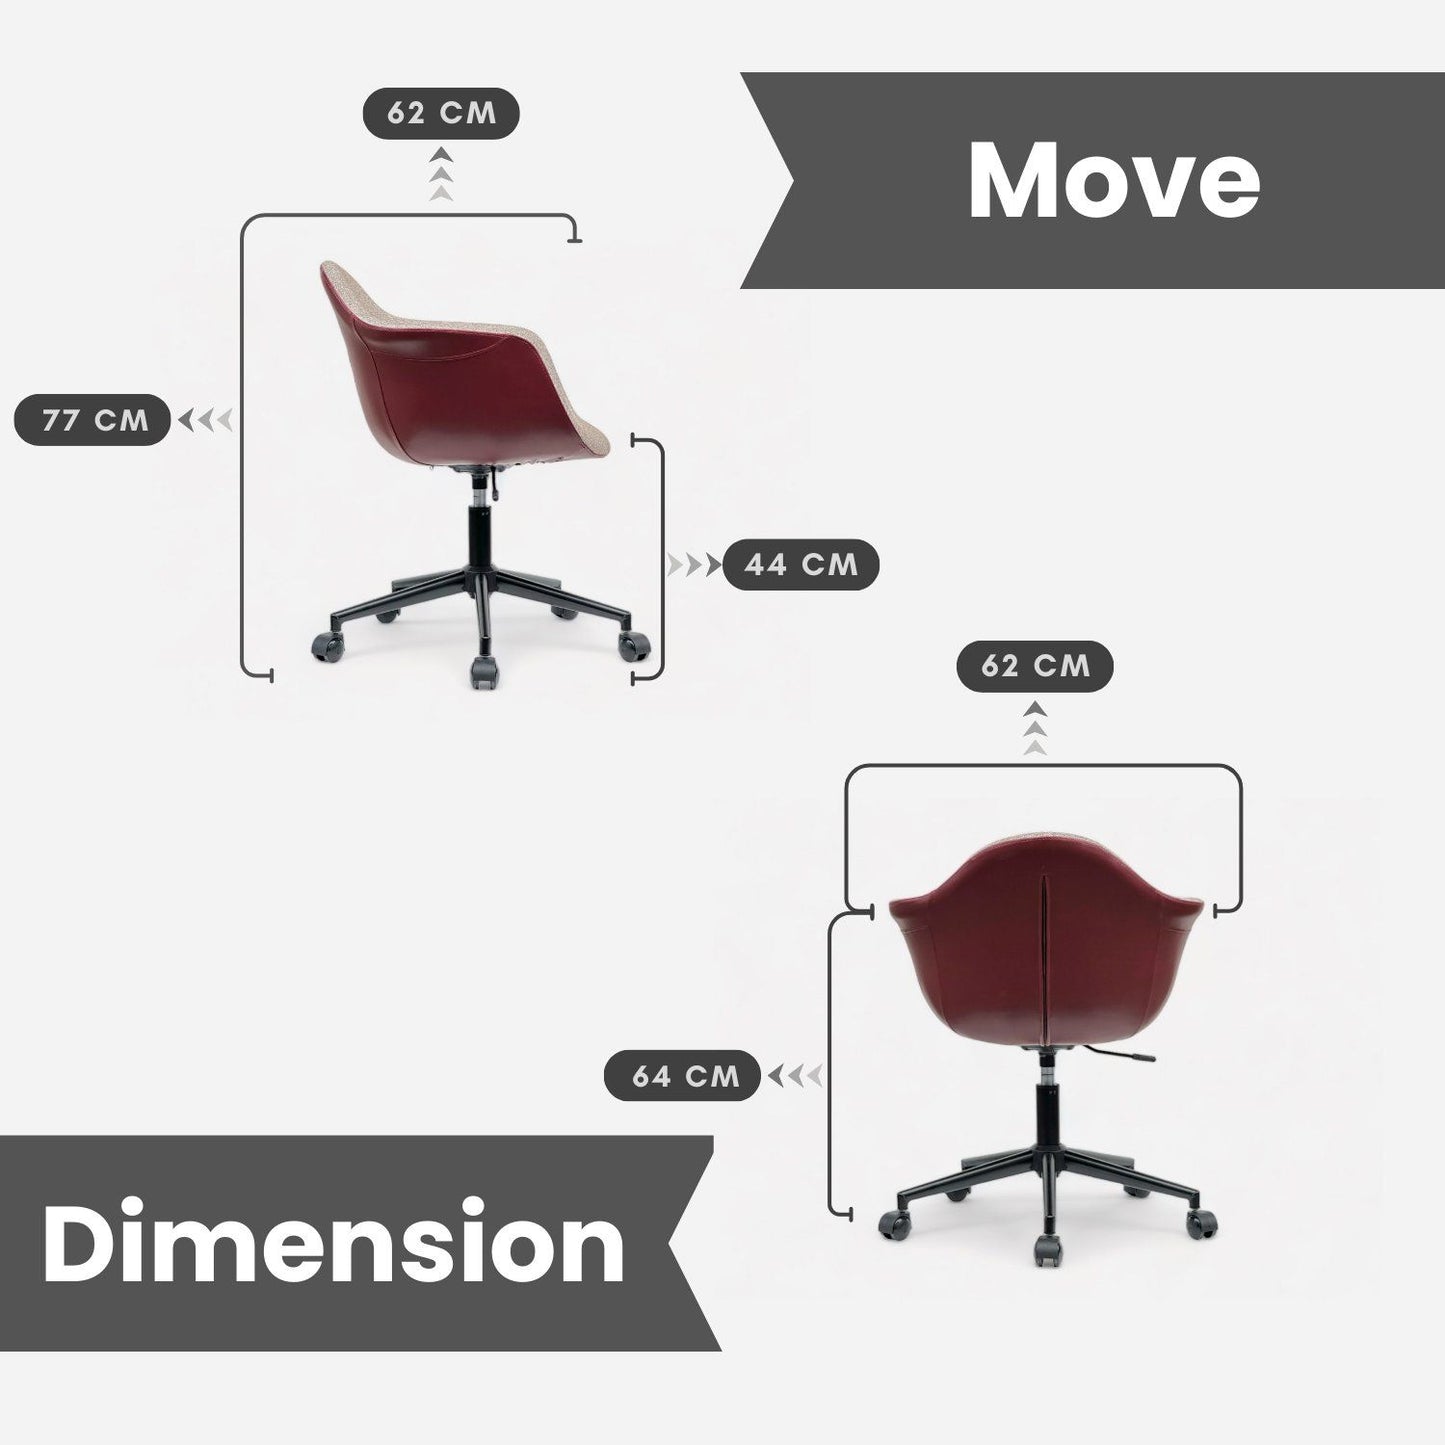 Move - Scarlet Red - Office Chair